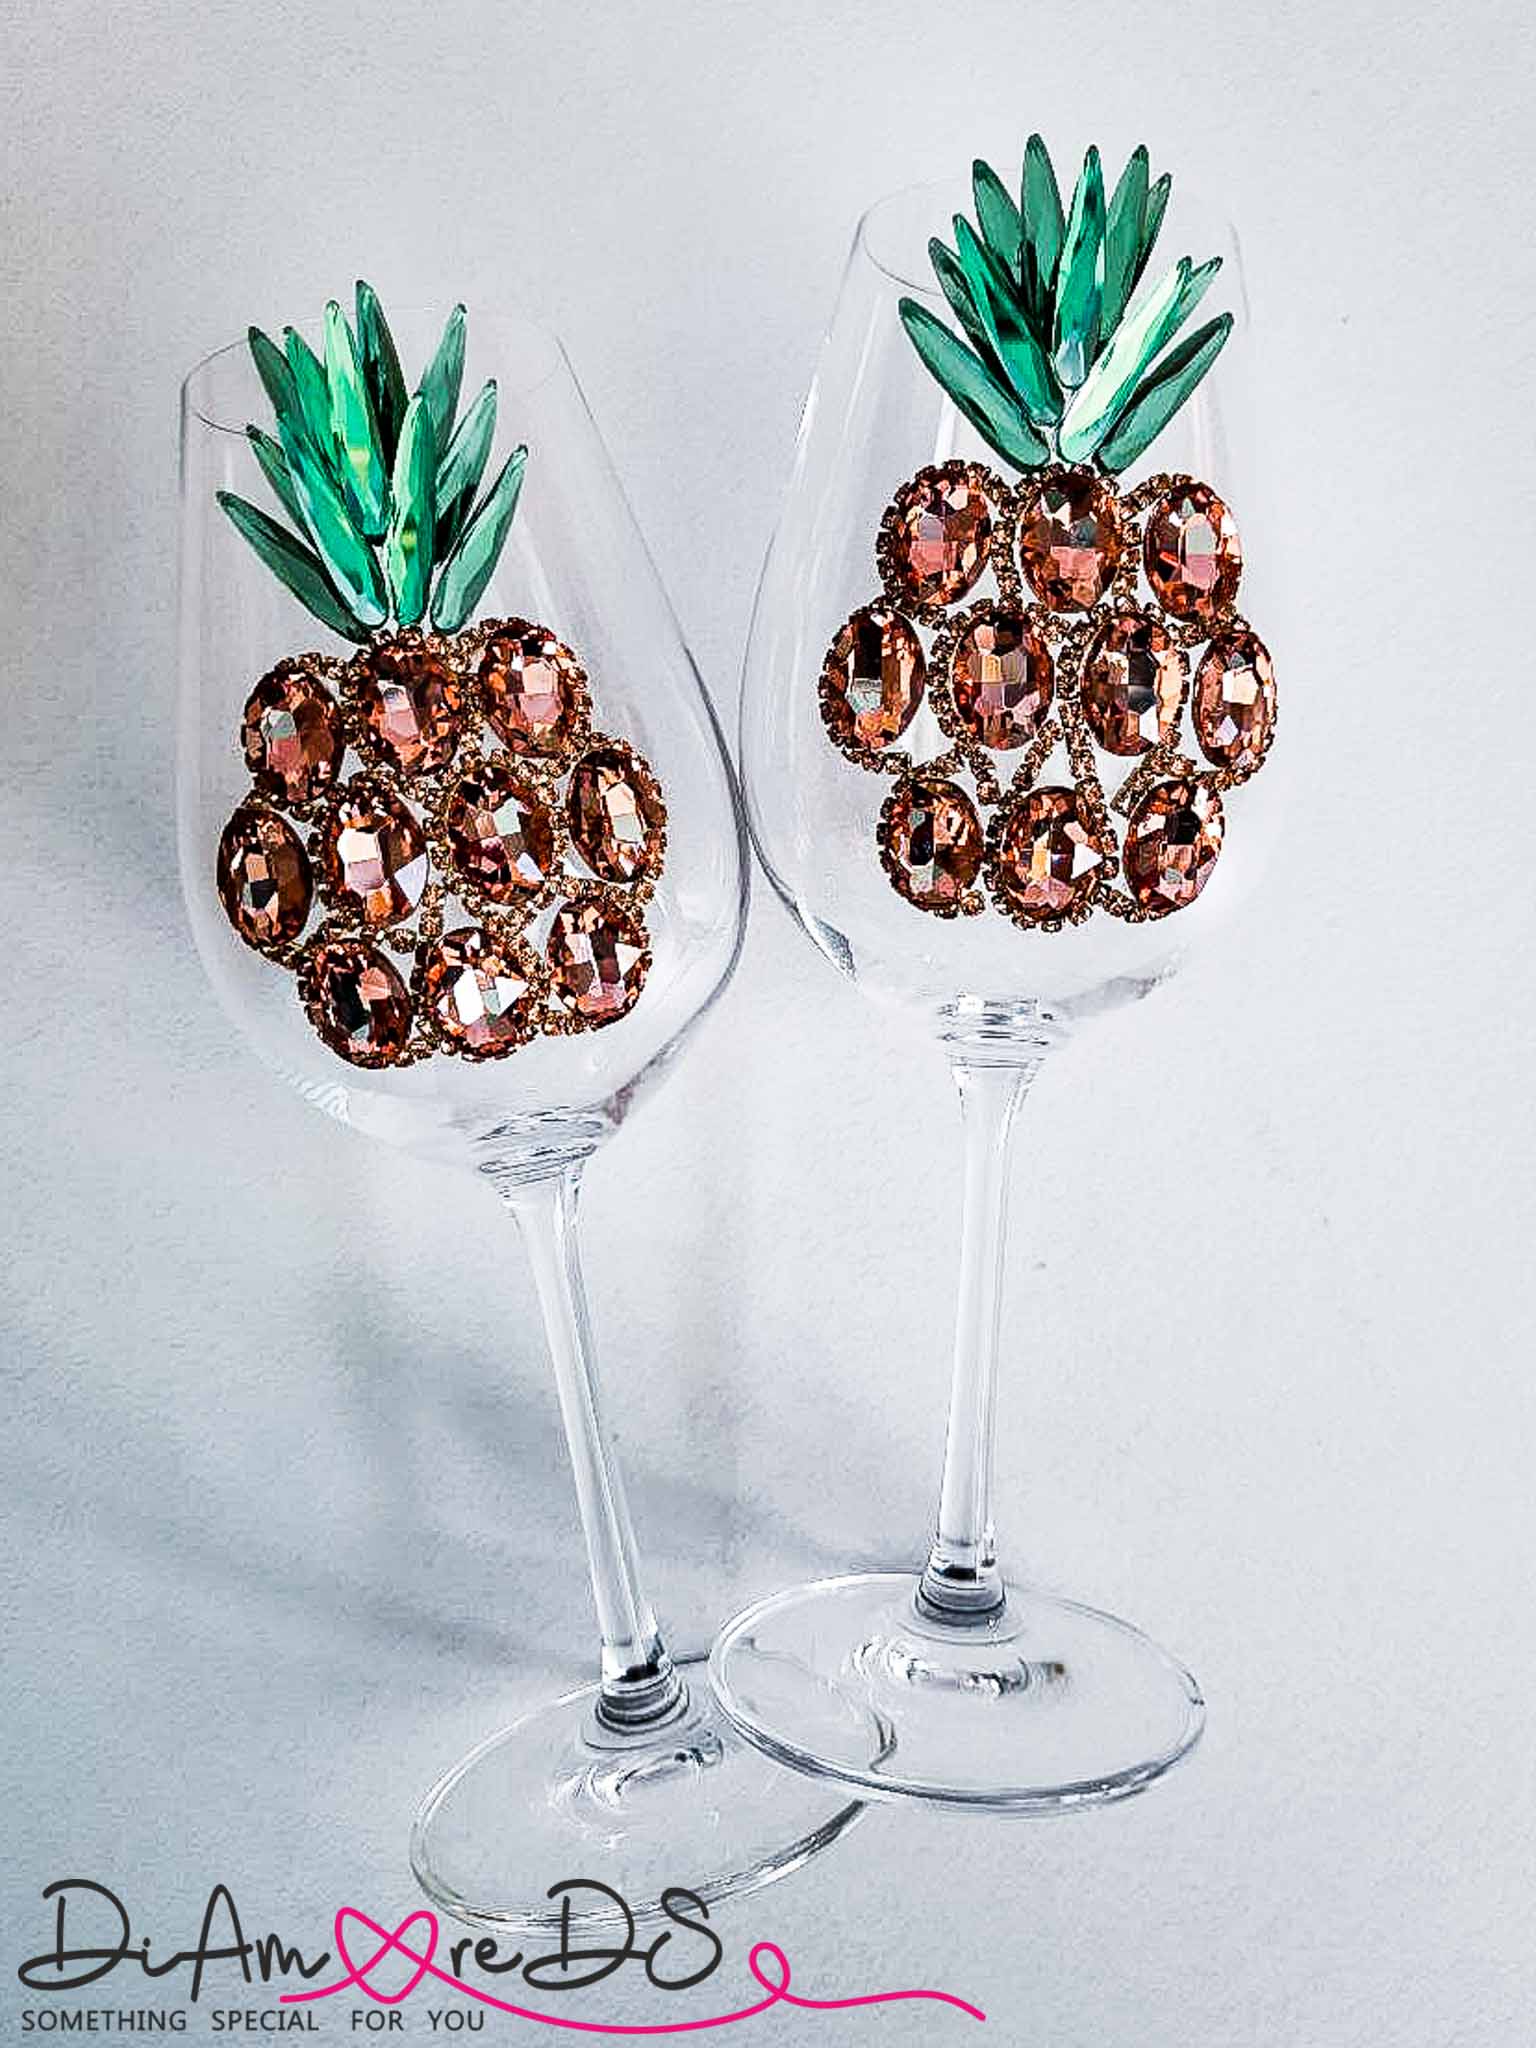 Luxury rose gold crystal pineapple motif on a clear wine glass, reflecting exquisite craftsmanship.